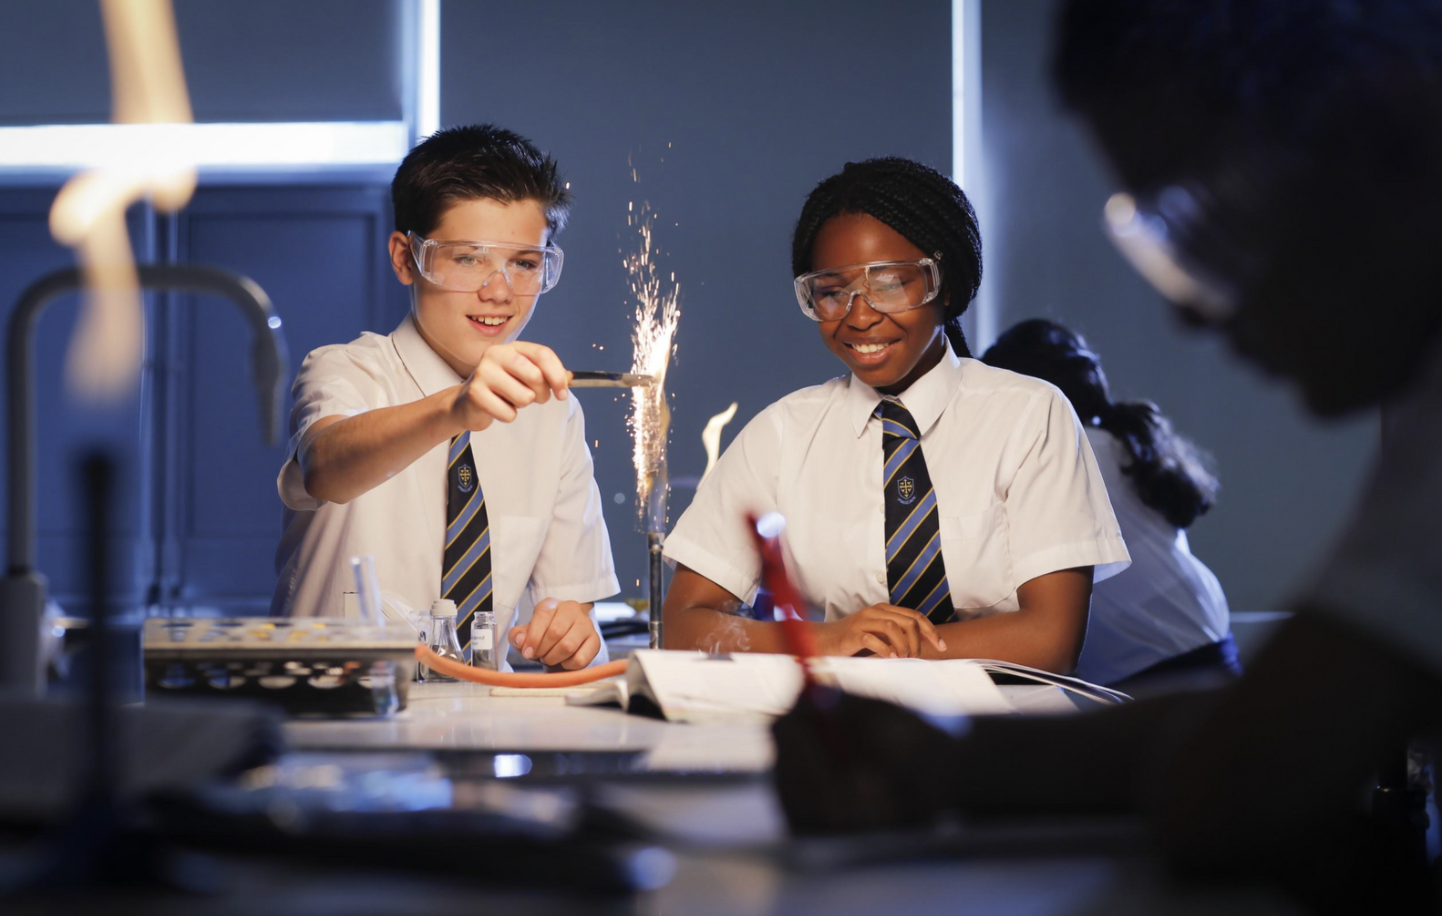 Pupils experimenting in a science lab